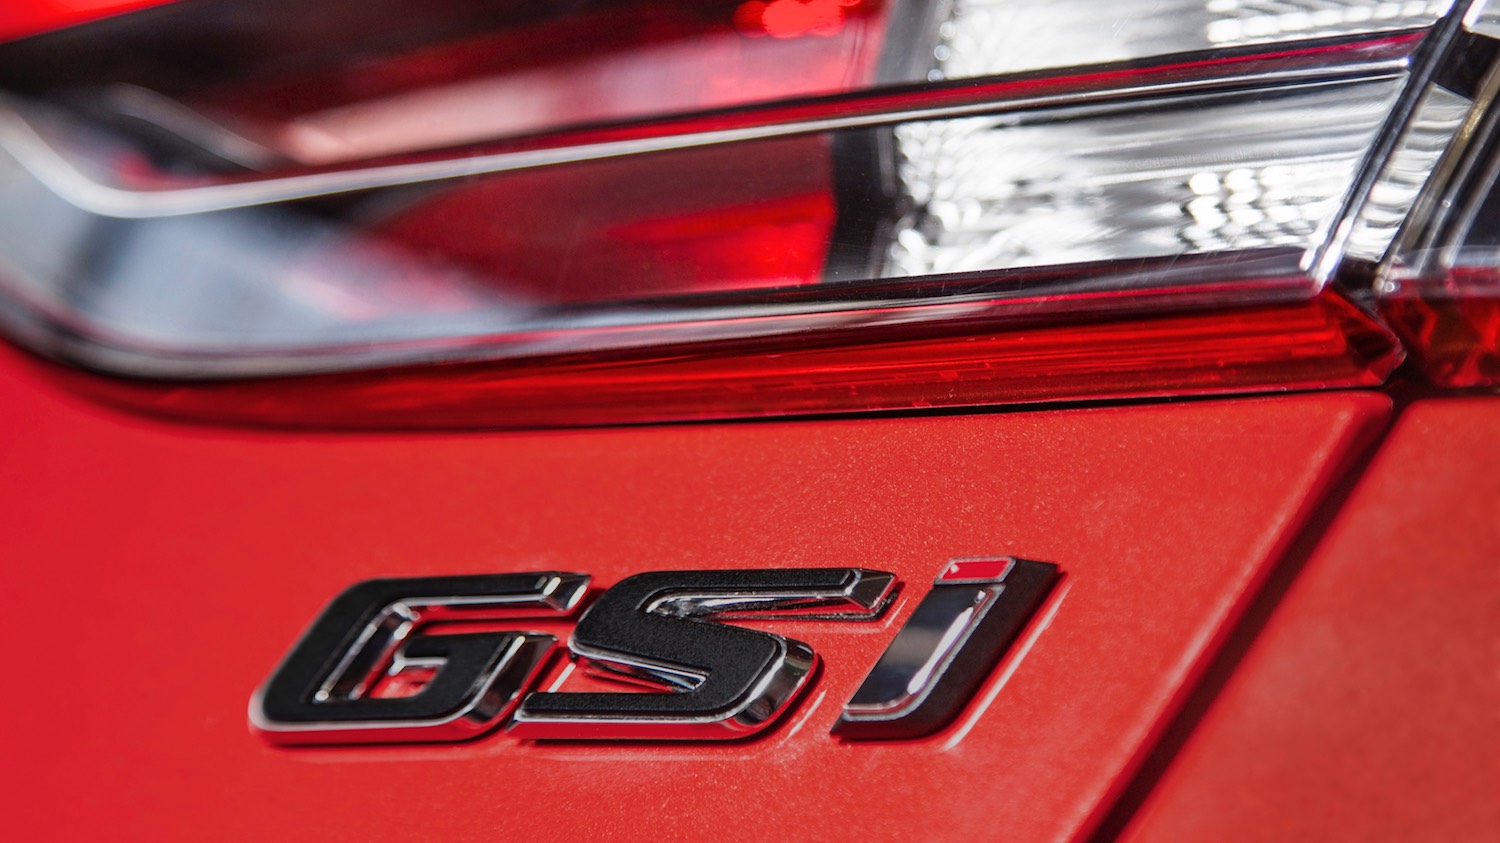 Tom Scanlan reviews the Vauxhall Insignia GSi Sportshatch for Drive 4